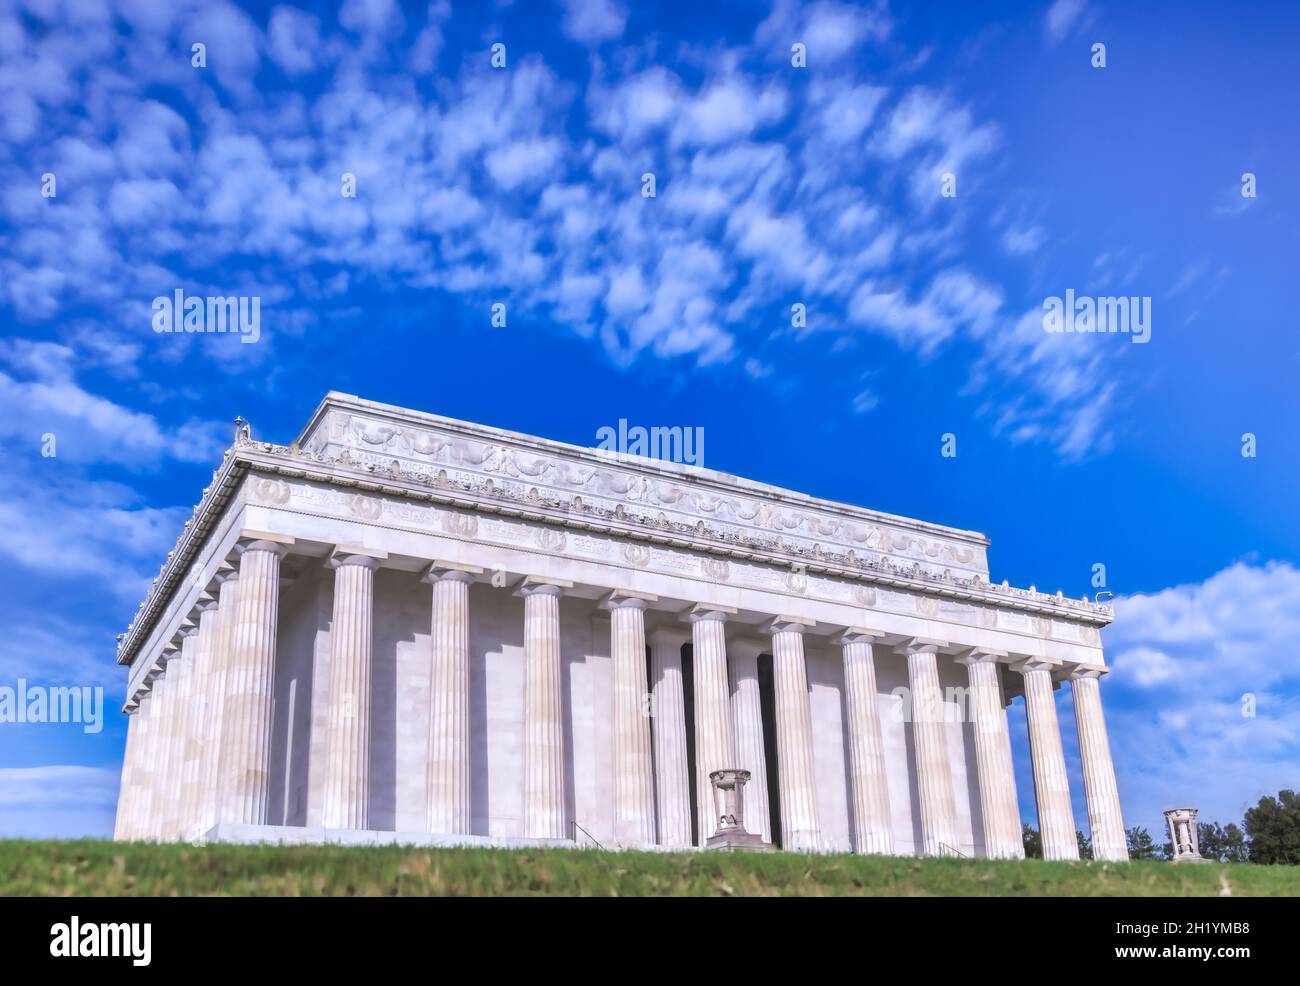 The Lincoln Memorial on the National Mall in Washington, D.C. Stock Photo